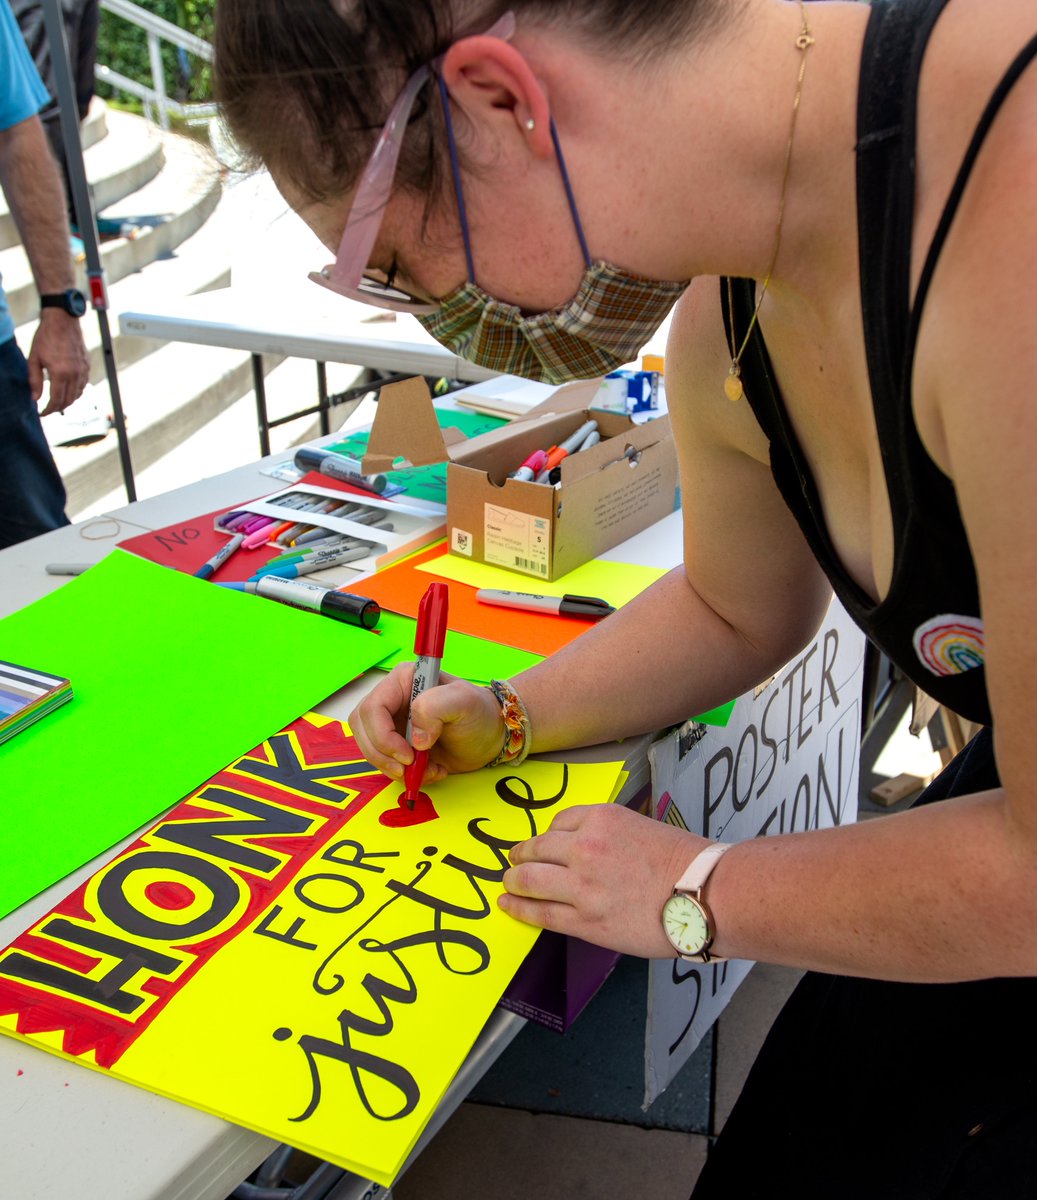 Hannah Shiff, 29, of Sherman Oaks, finishes a poster for people demonstrating against racial inequality and in support of Black Lives at the Sherman Oaks Galleria. She's lived here 7 years, and said she's never seen this much political activity here and welcomes the change.